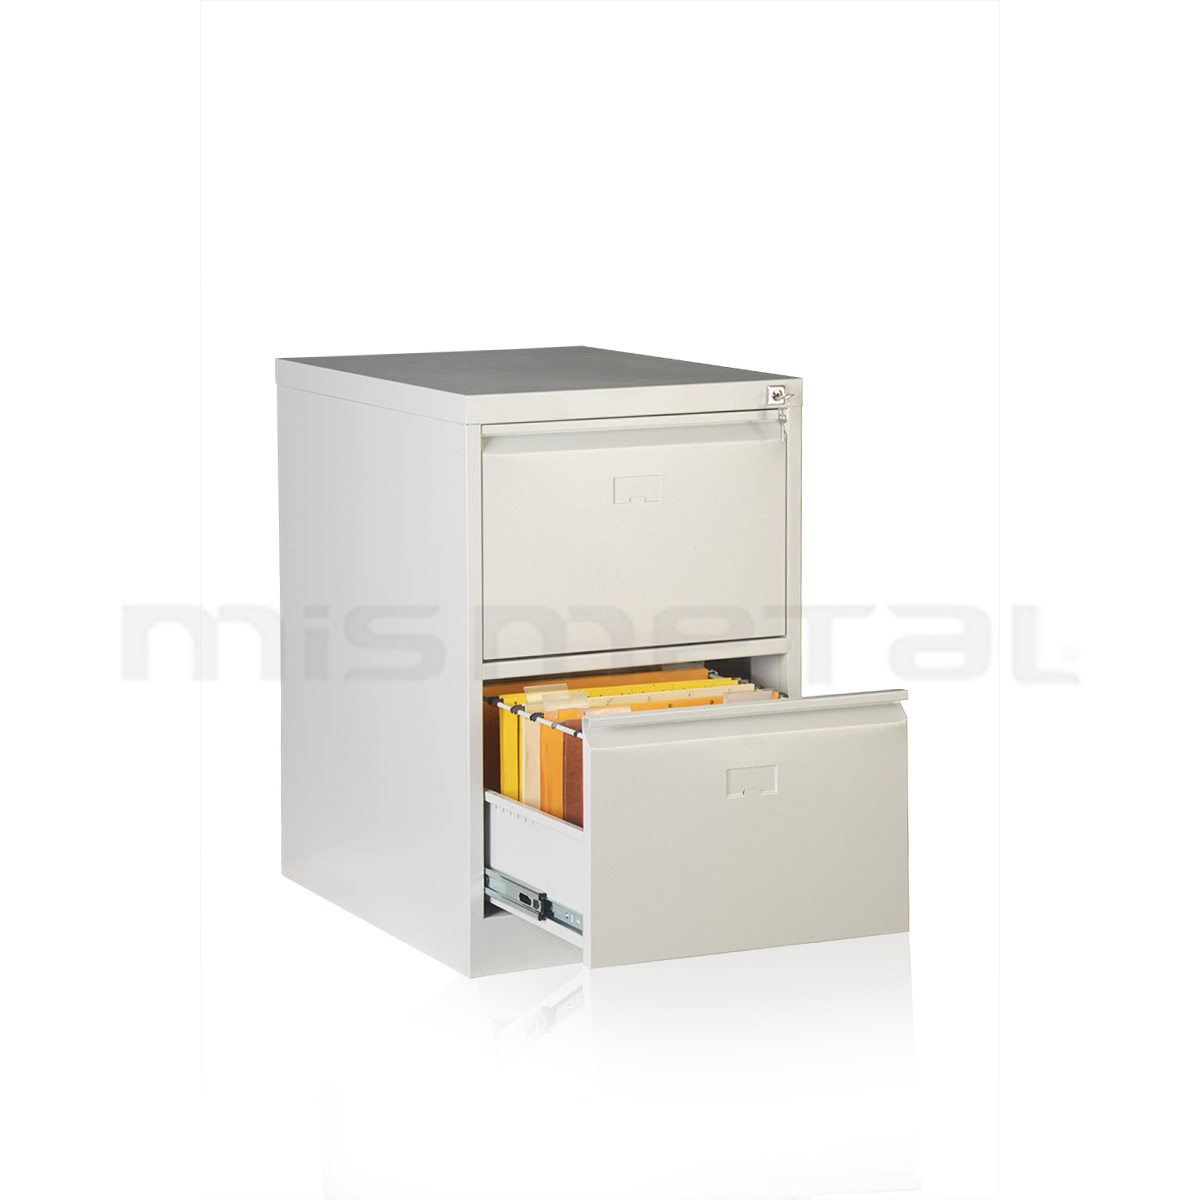 2 Drawers Telescopic Rail Card Index Cabinet